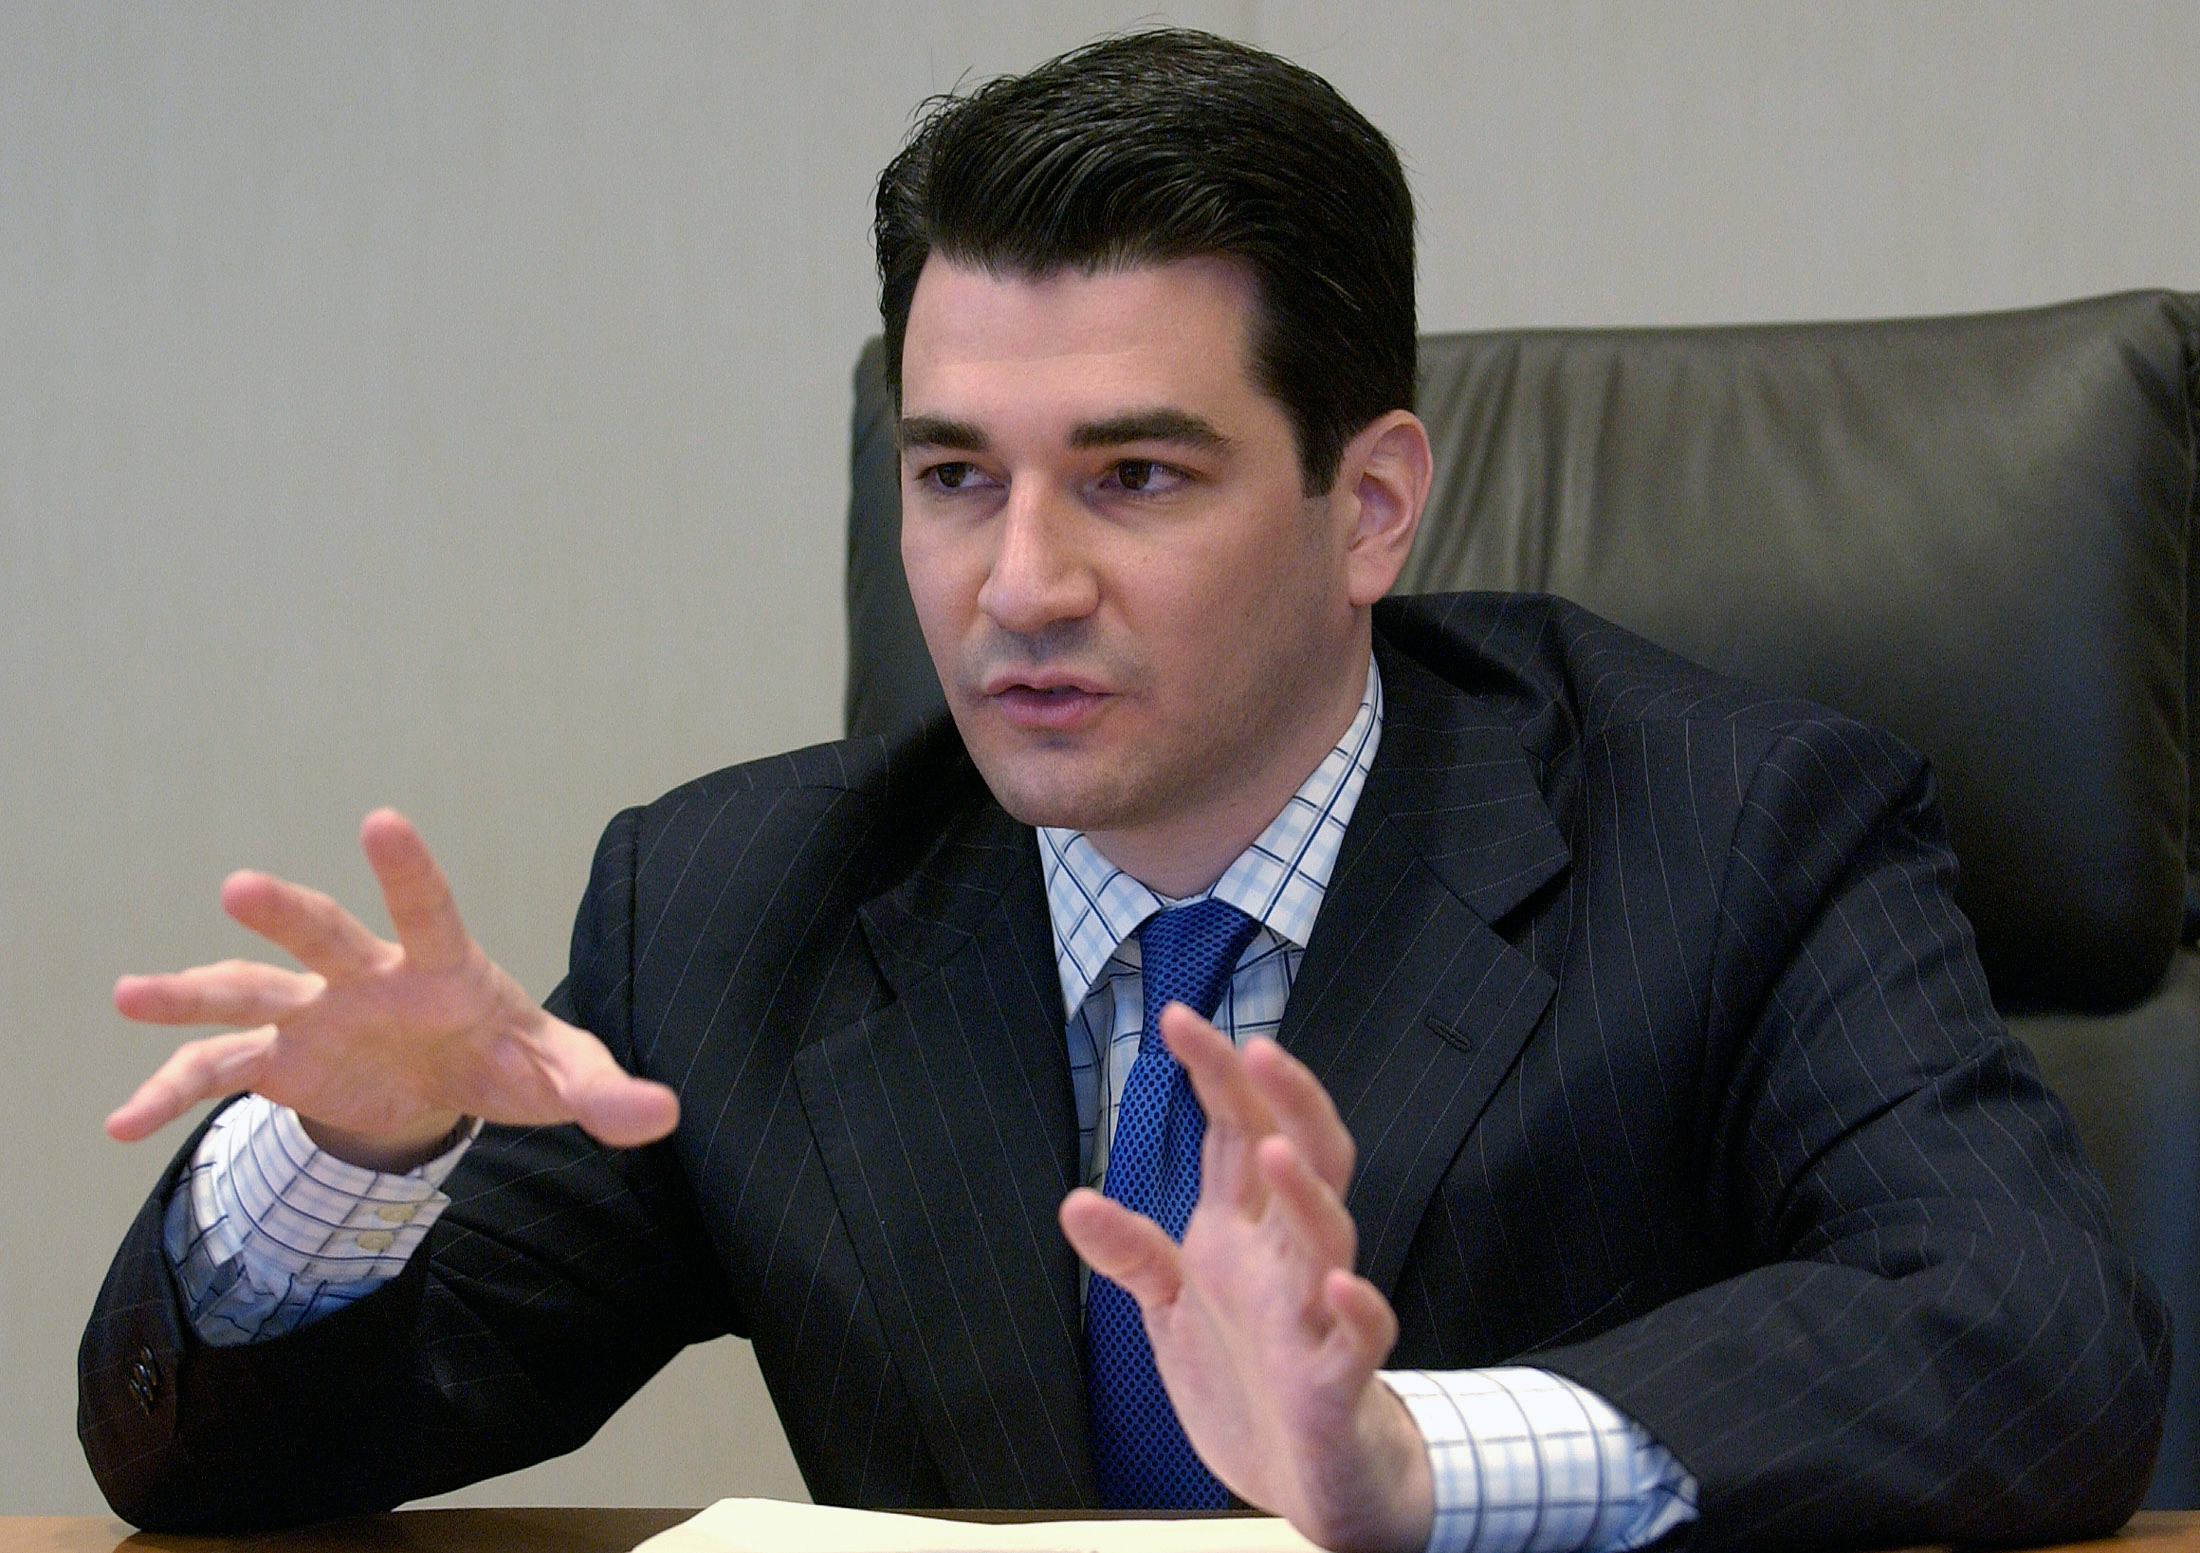 Scott Gottlieb speaks to reporters at the Reuters Health summit in New York, on Nov. 8, 2005. (Chip East—Reuters)